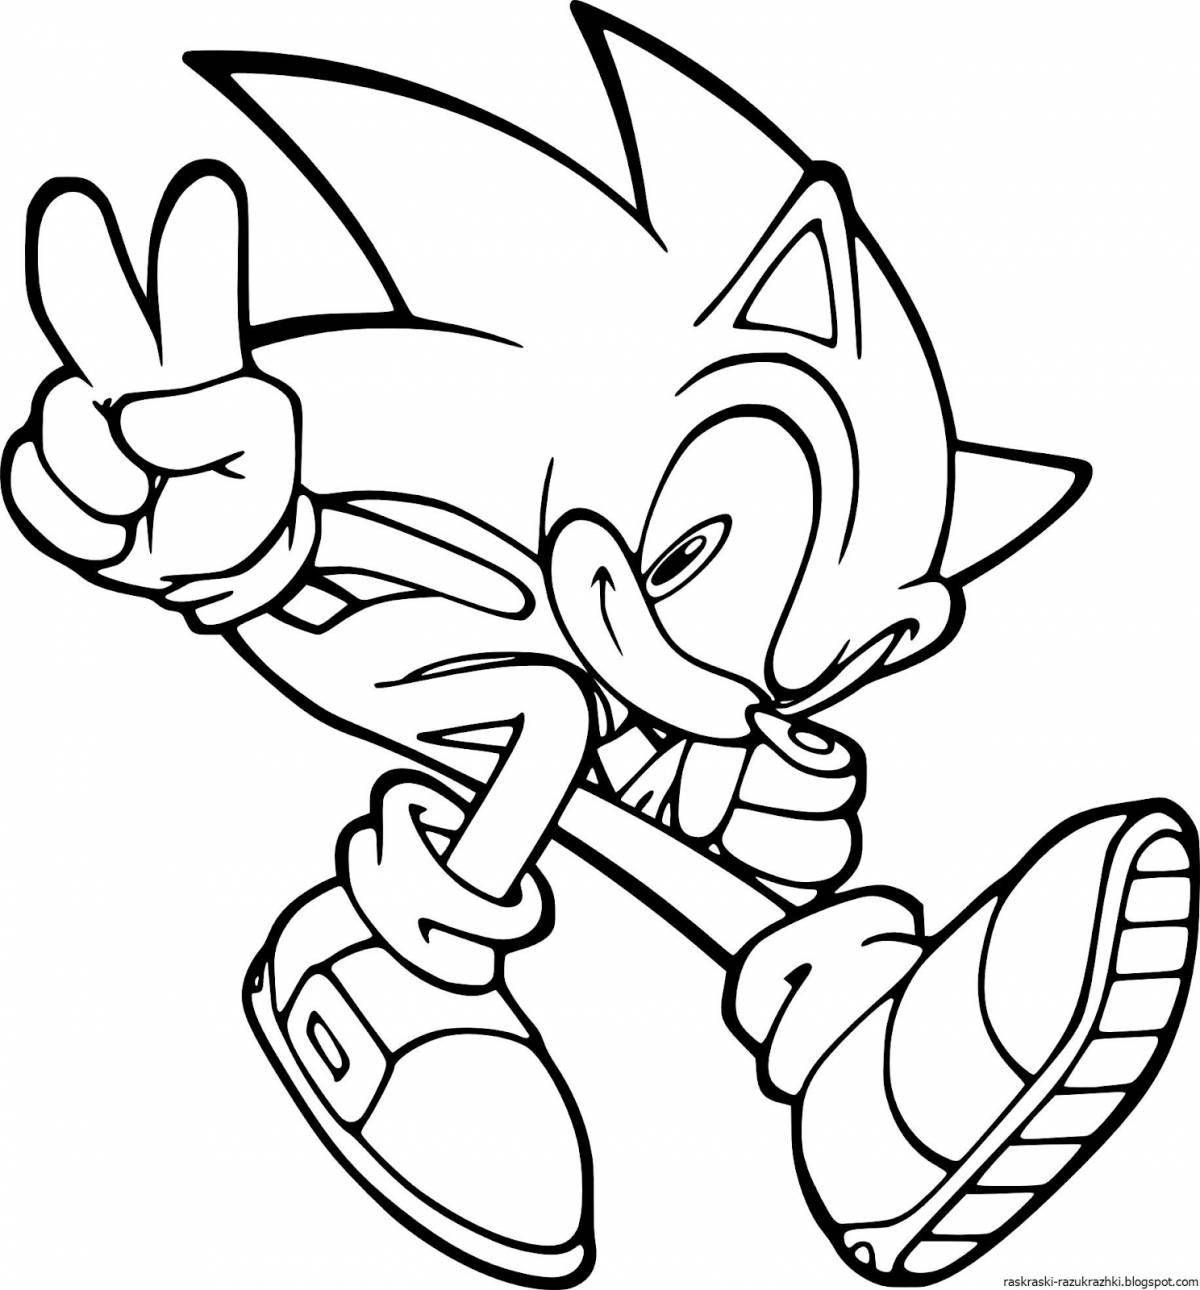 Colorful super sonic coloring book